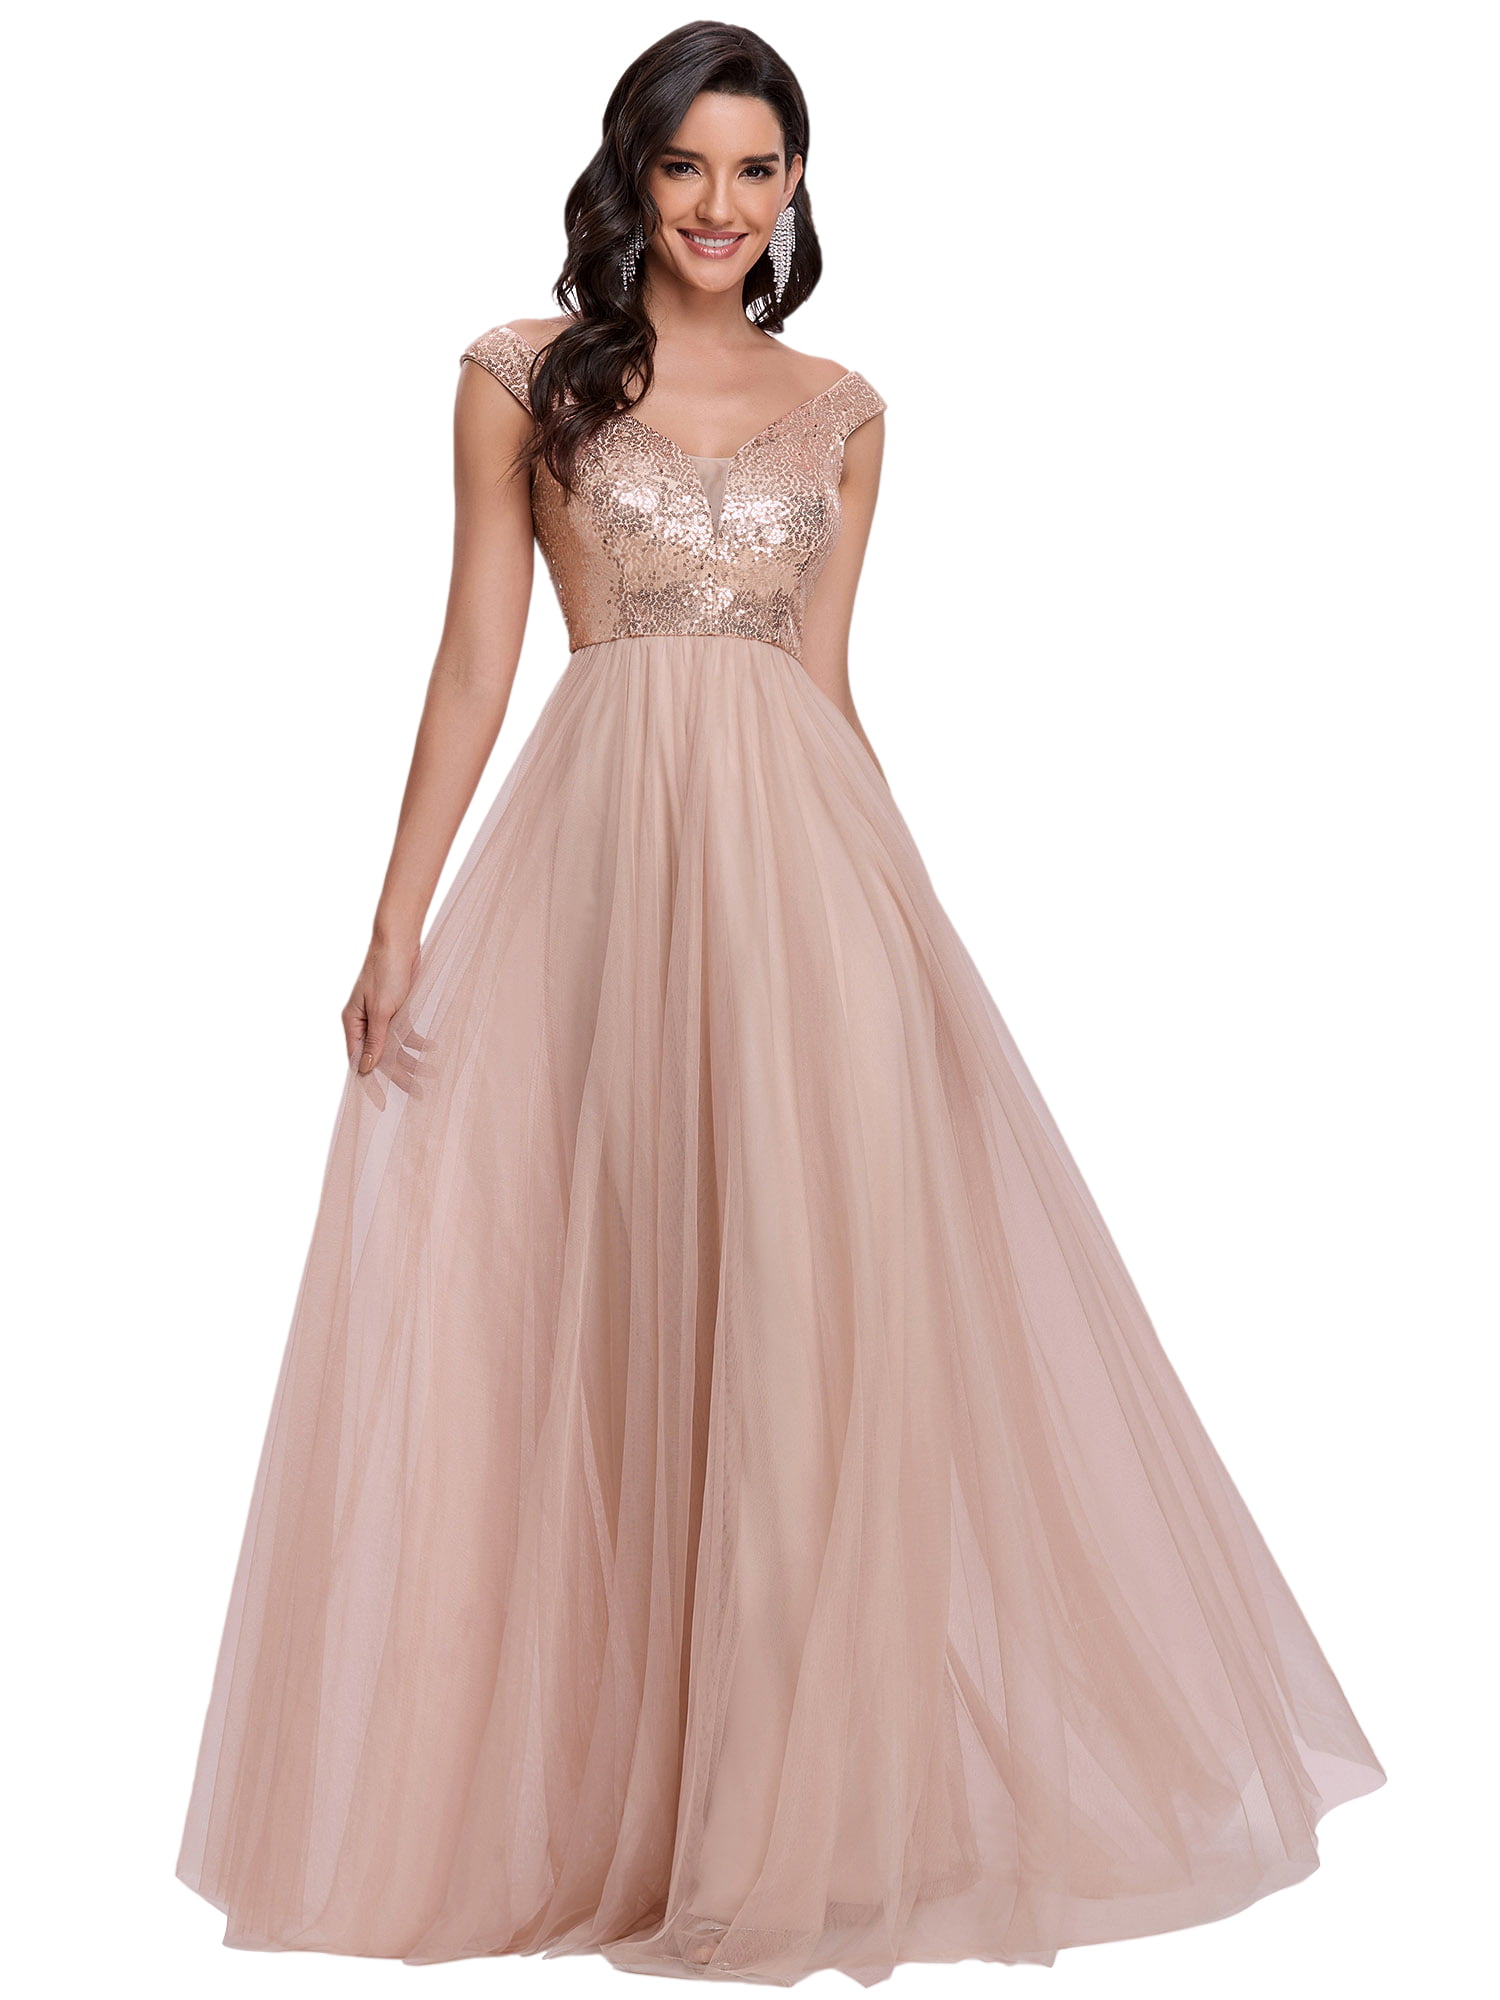 US Ever-Pretty V-neck Long Evening Party Prom Dresses Fishtail Wedding Ball Gown 